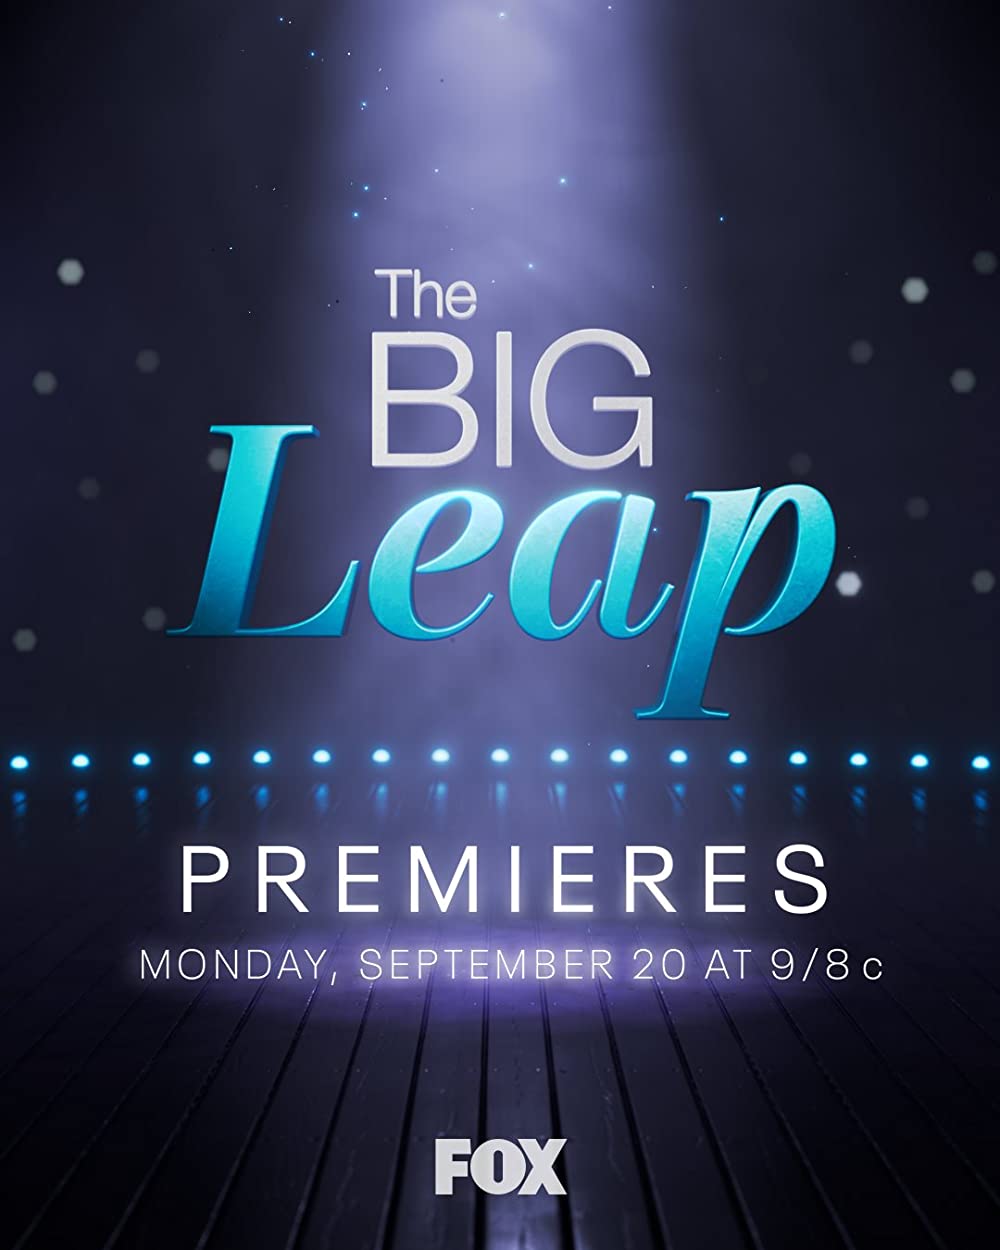 FOX The Big Leap New Show Details - Is it too late? This foundation is here to help you take that leap!